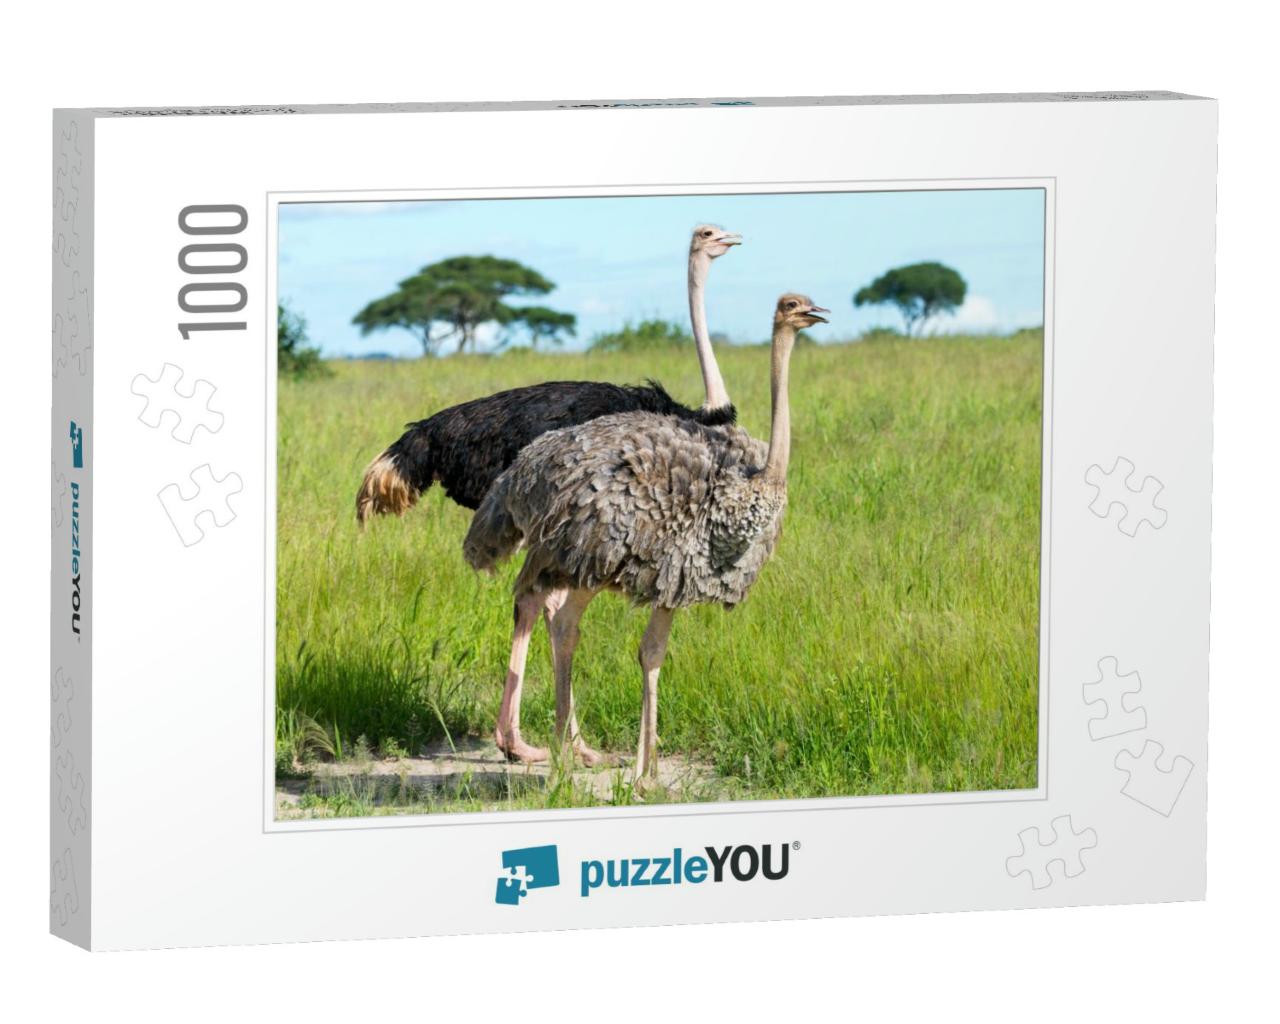 Pair of Ostriches, Tanzania, Africa... Jigsaw Puzzle with 1000 pieces